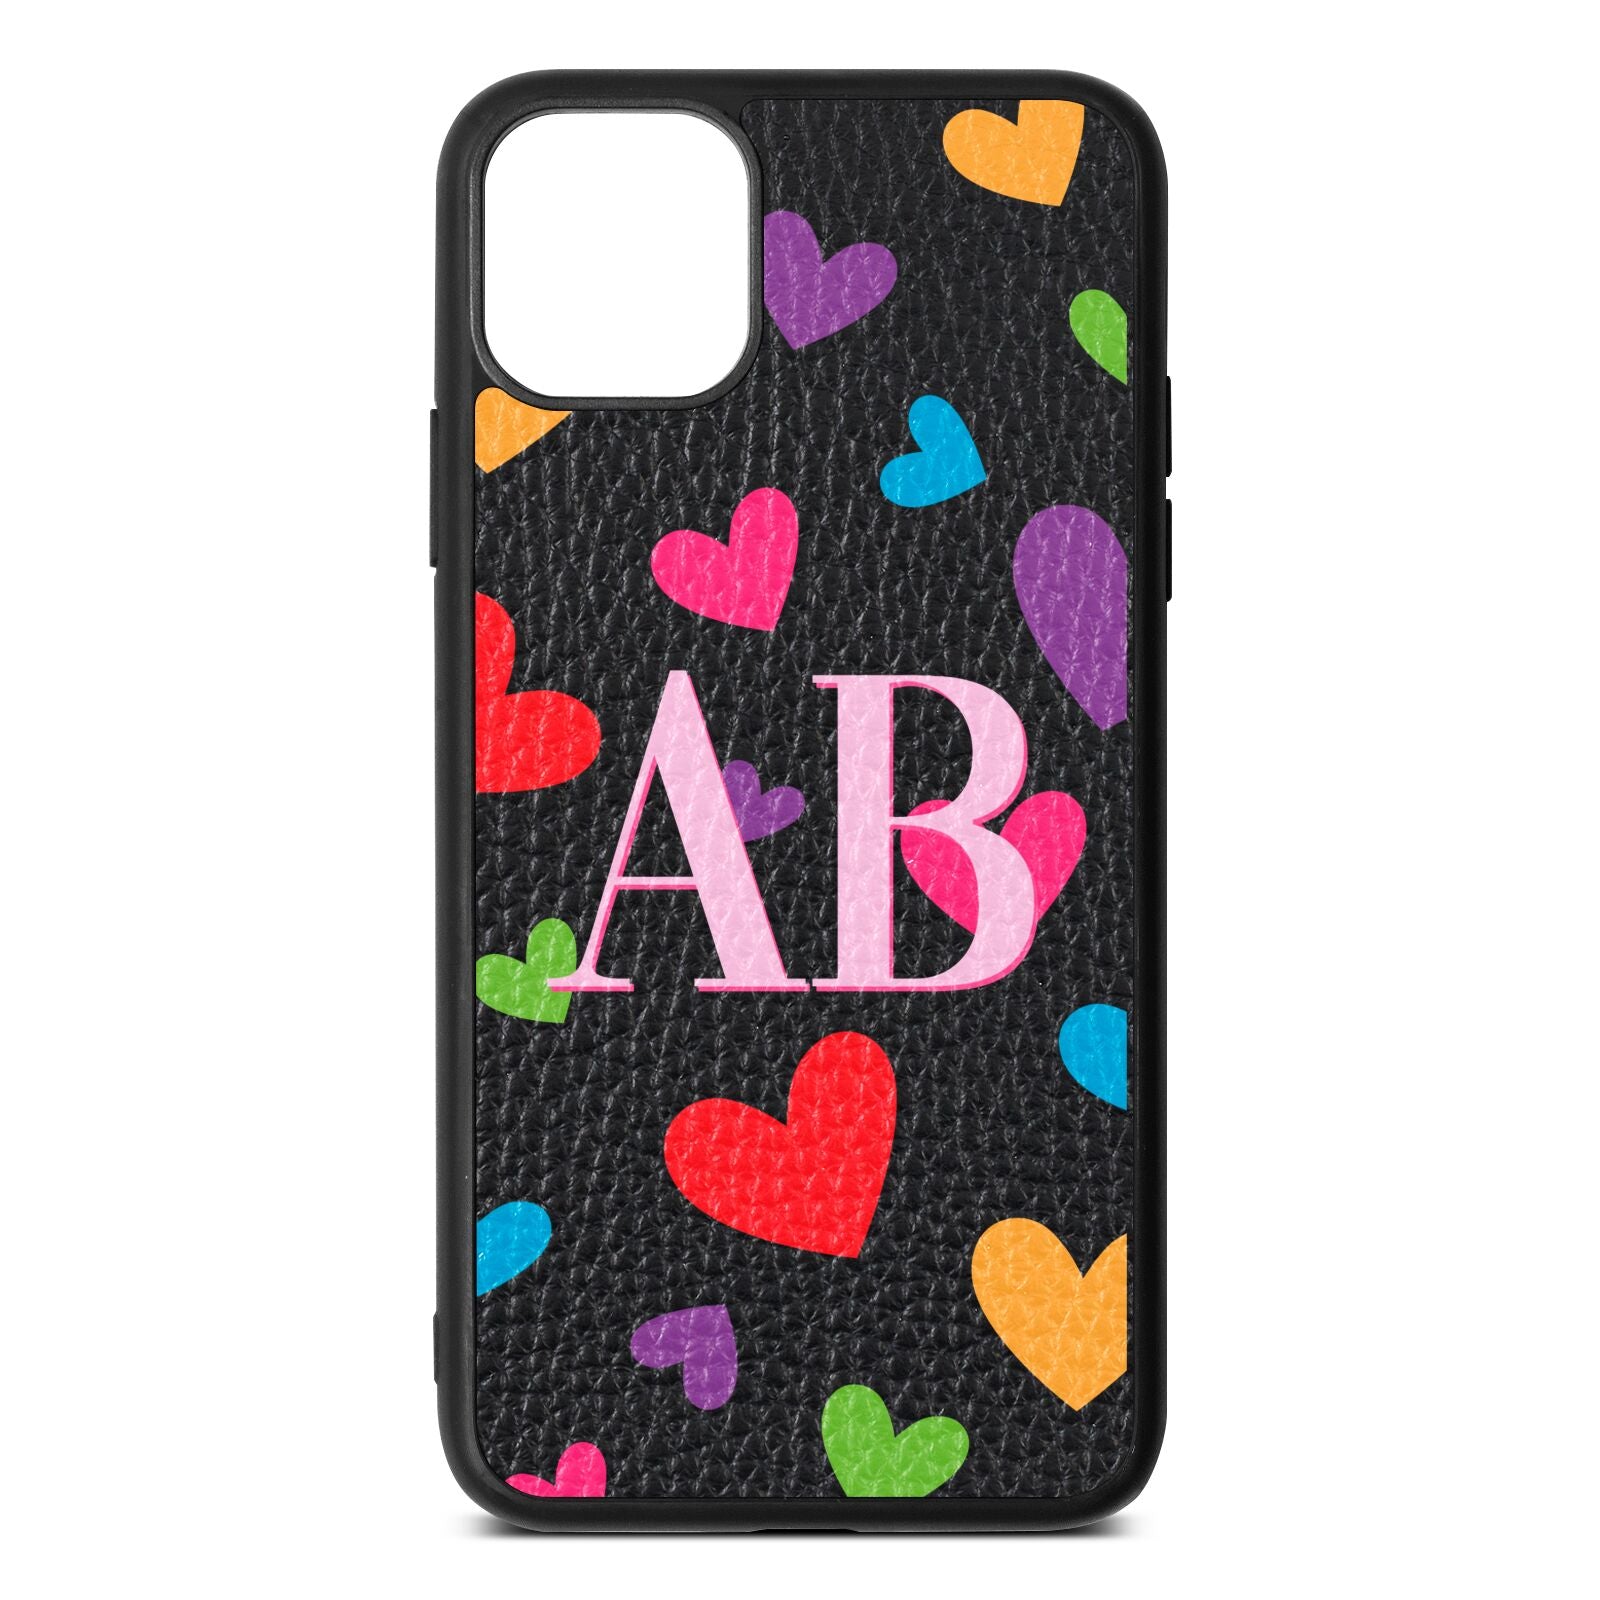 Contrast Initials Heart Print Black Pebble Leather iPhone 11 Pro Max Case